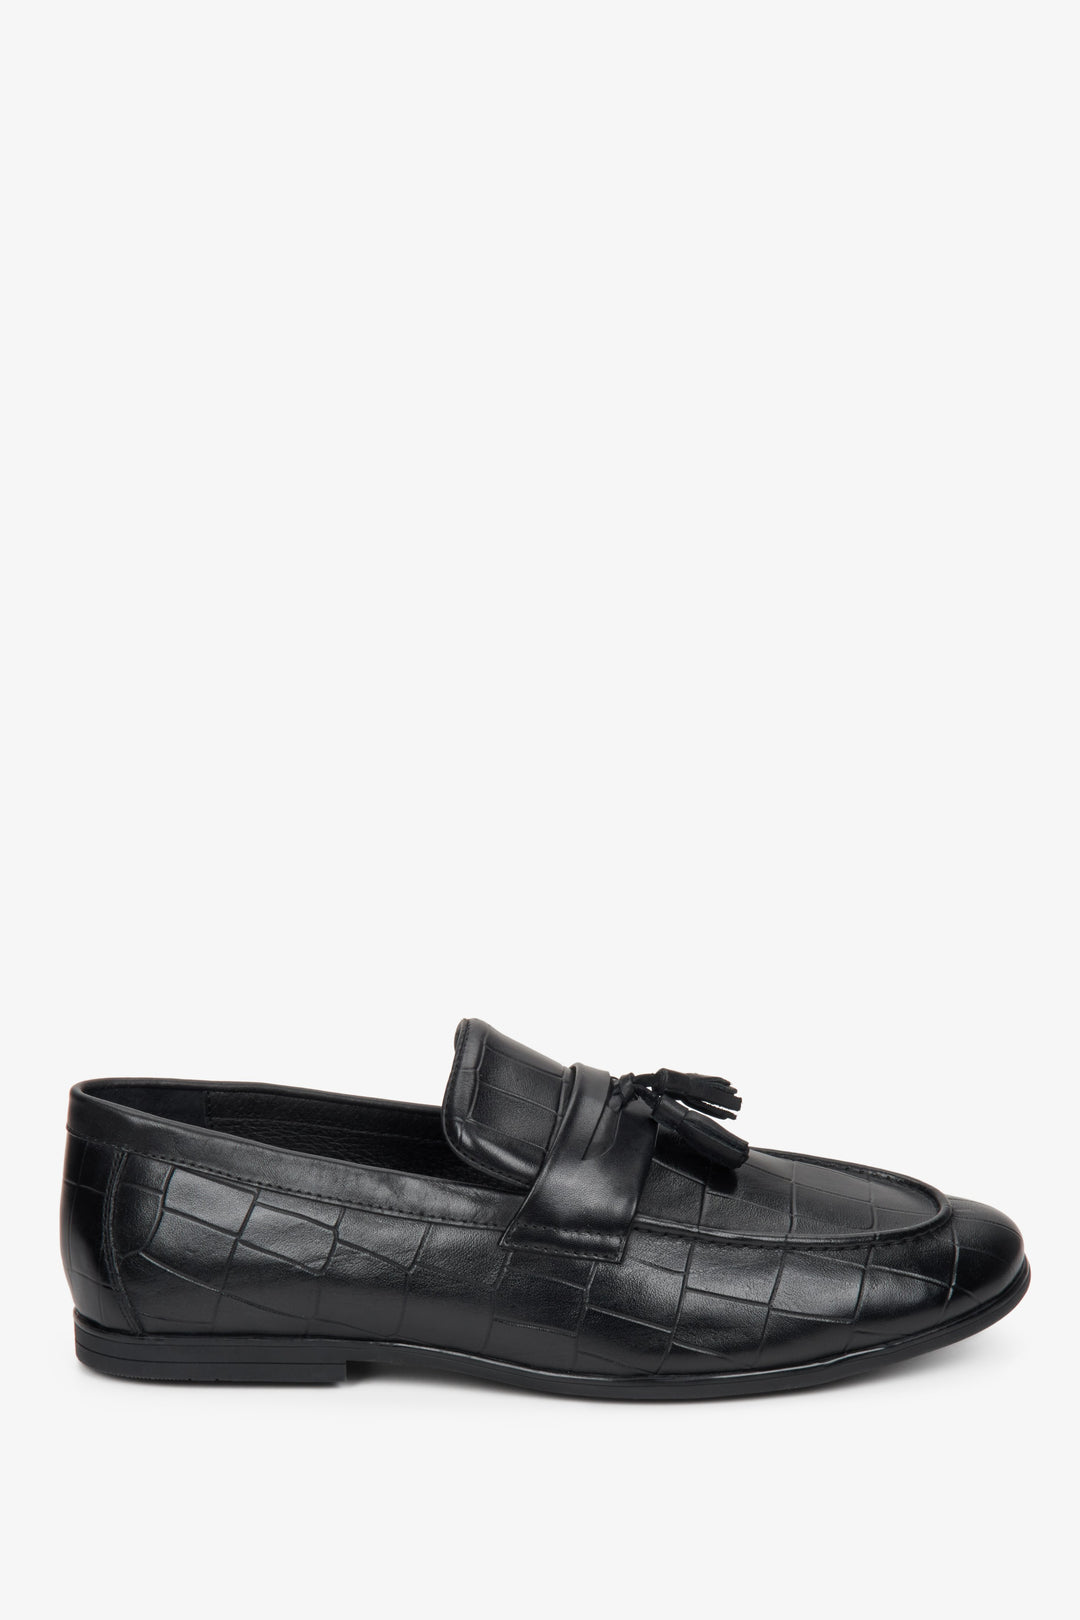 Men's black loafers made of genuine leather - close-up of the shoe profile by Estro.